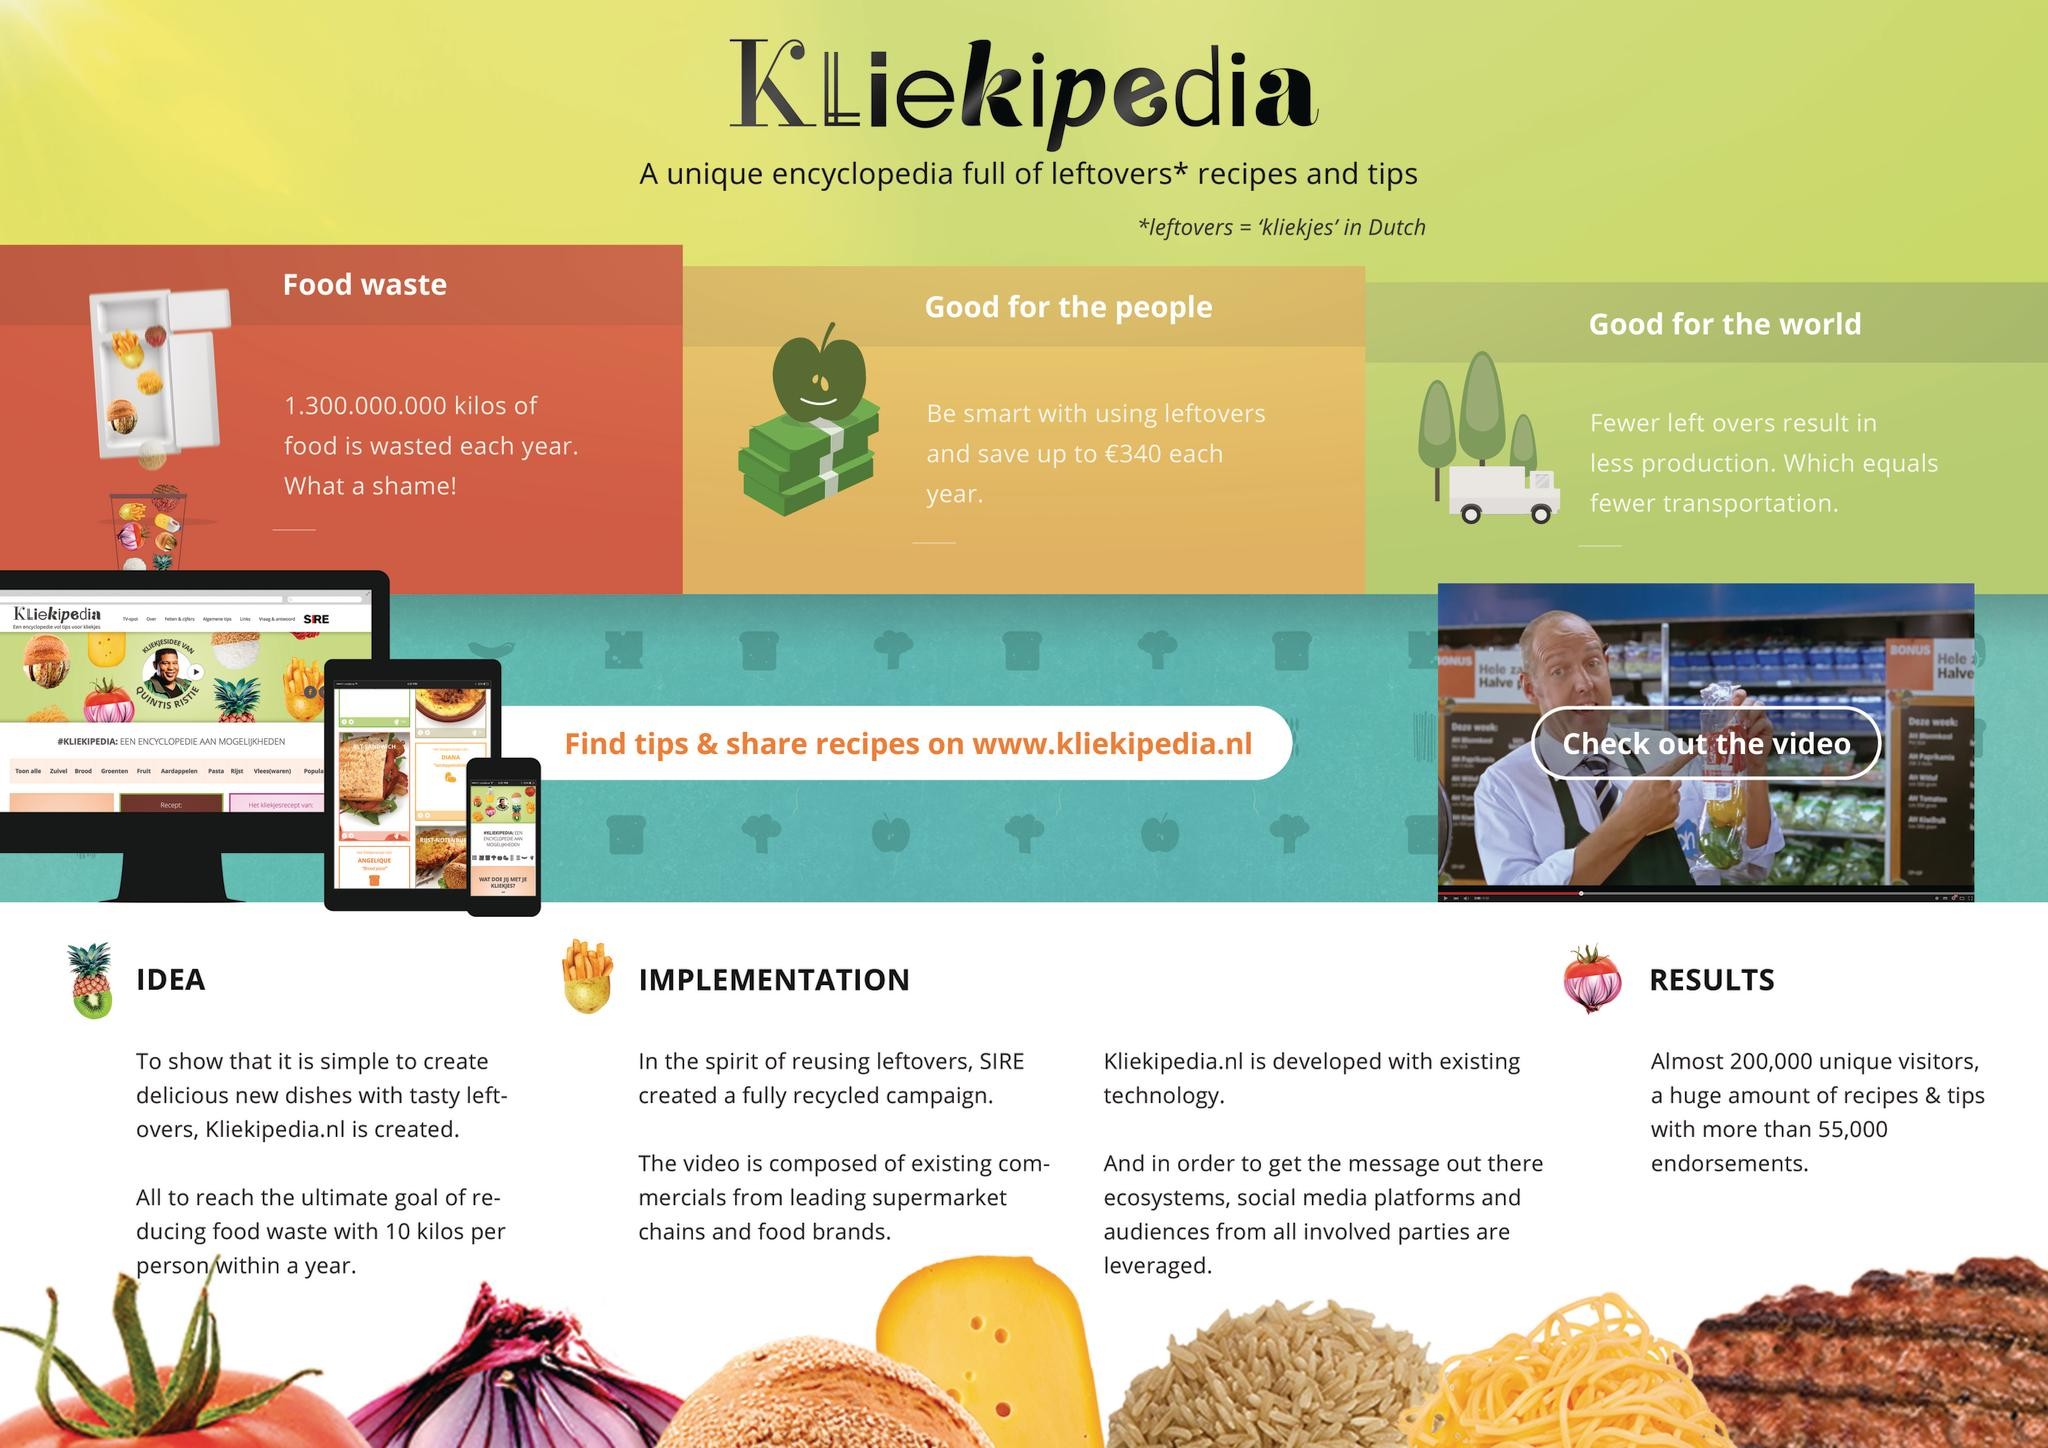 KLIEKIPEDIA - A UNIQUE ENCYCLOPEDIA FULL OF LEFTOVERS AND TIPS